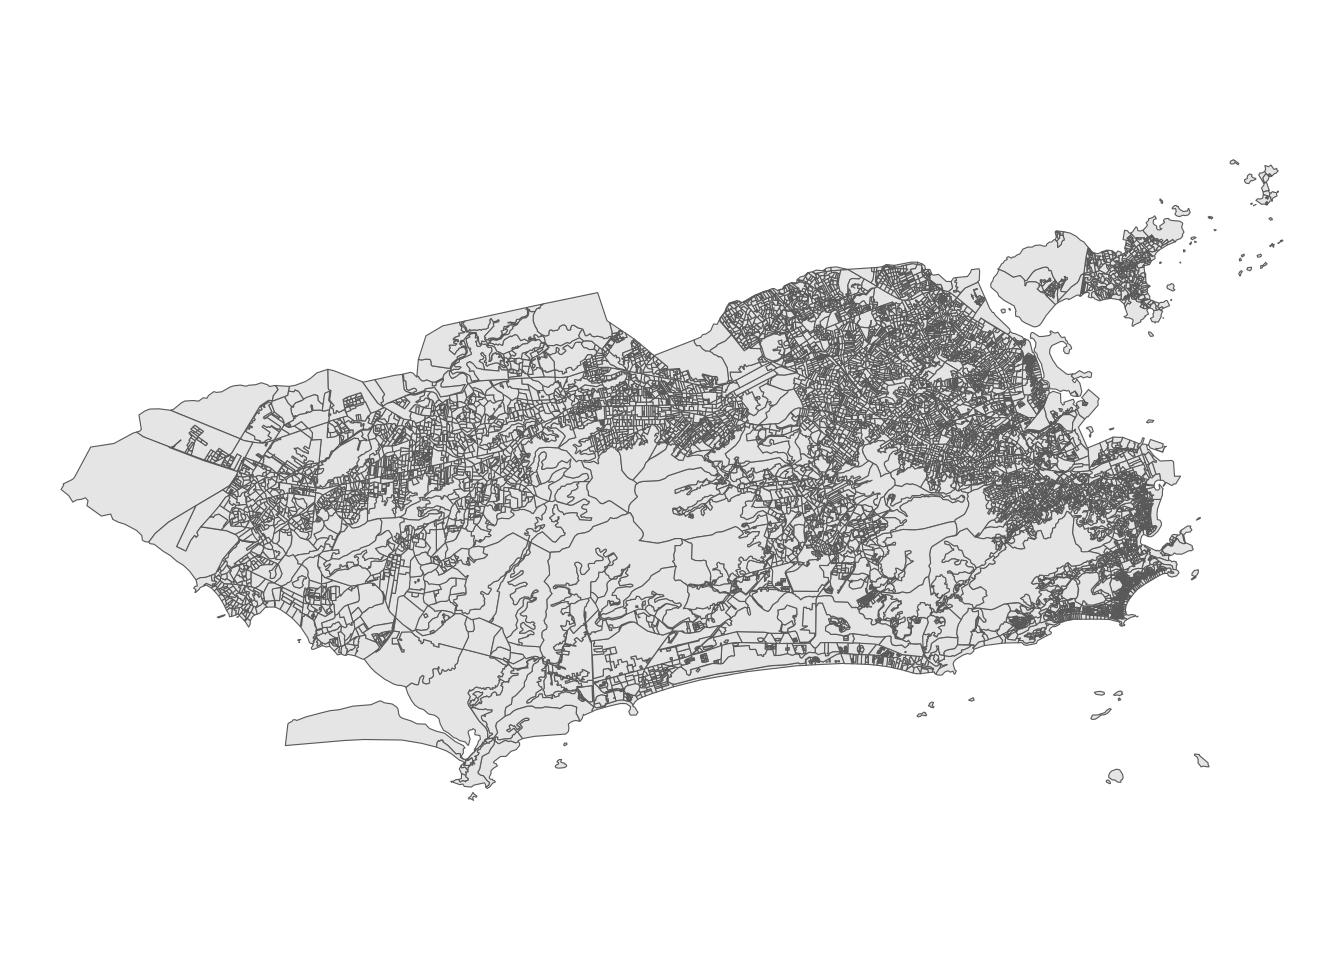 Basic ggplot2 map of Census tracts in Rio de Janeiro